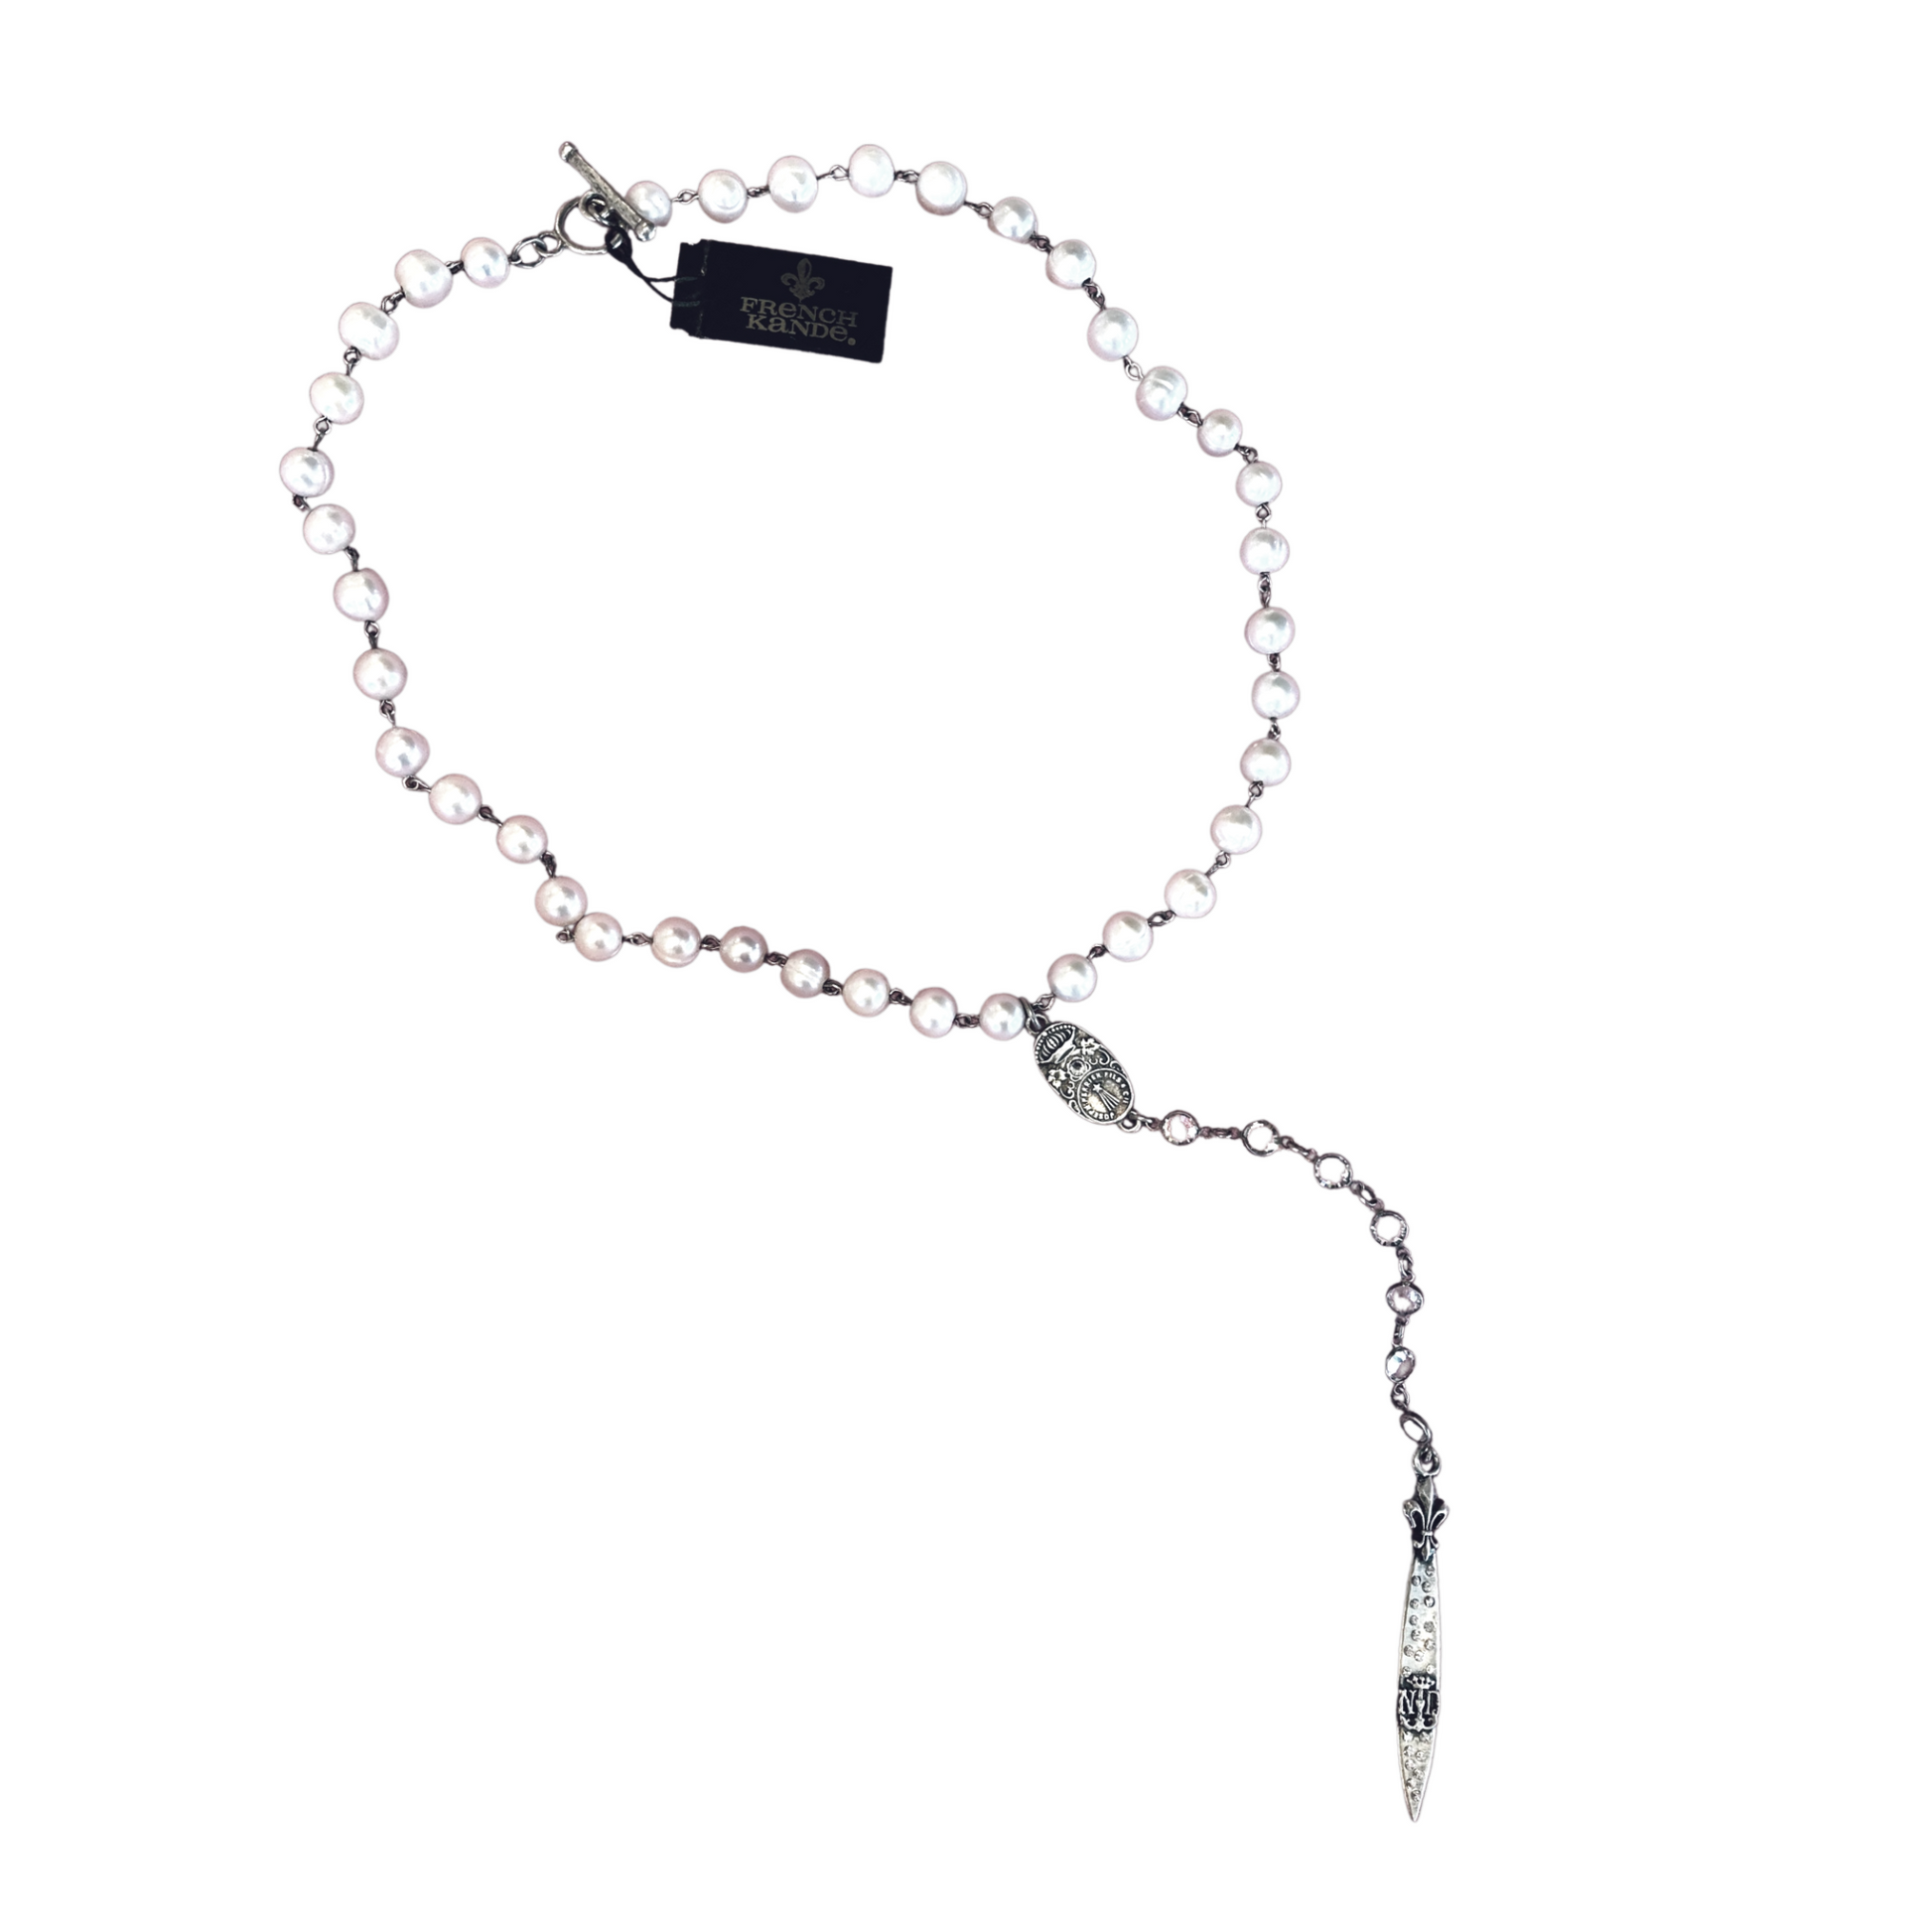 A pearl necklace with a long, silver pendant and a silver chain.